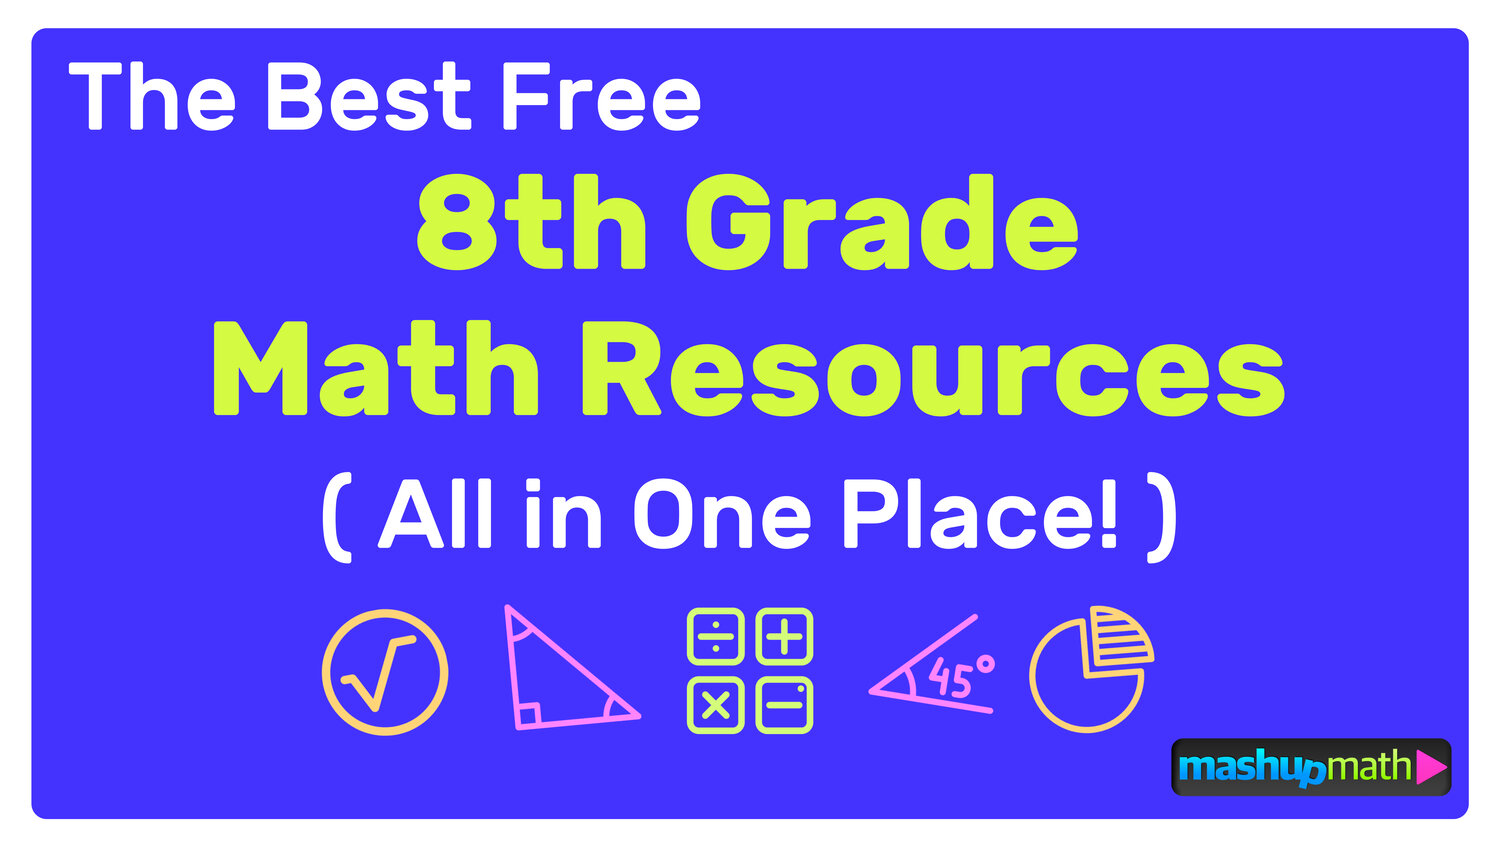 The Best Free 8th Grade Math Resources Complete List Mashup Math